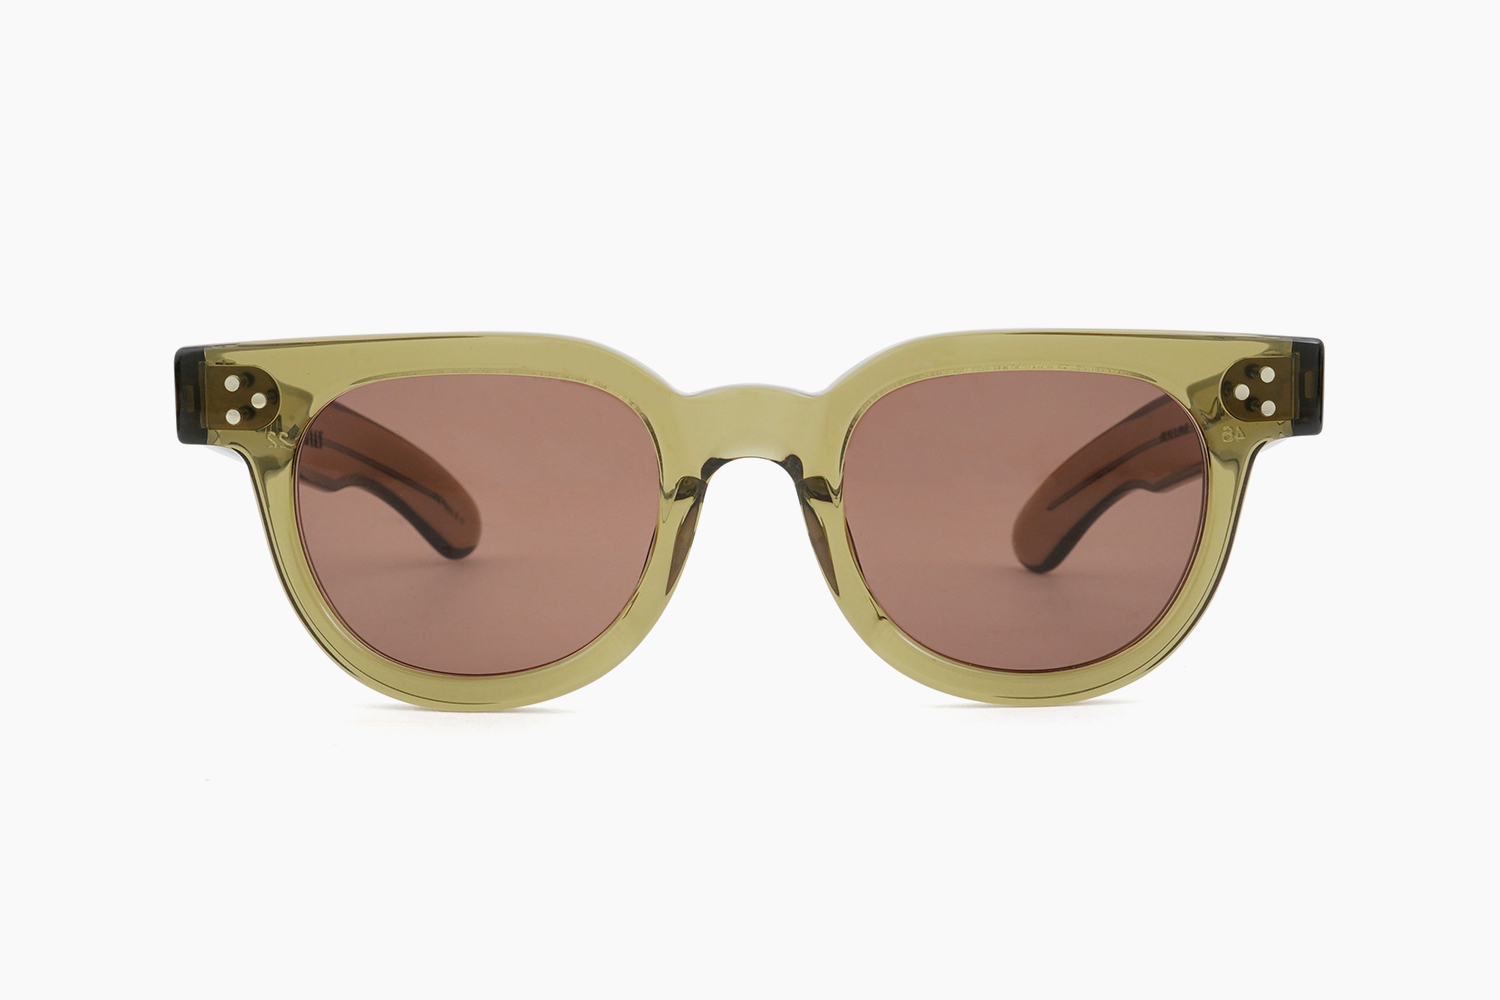 JULIUS TART OPTICAL for Continuer｜FDR SG - OLIVE / LIMITED - CHOCO BROWN｜JULIUS TART OPTICAL